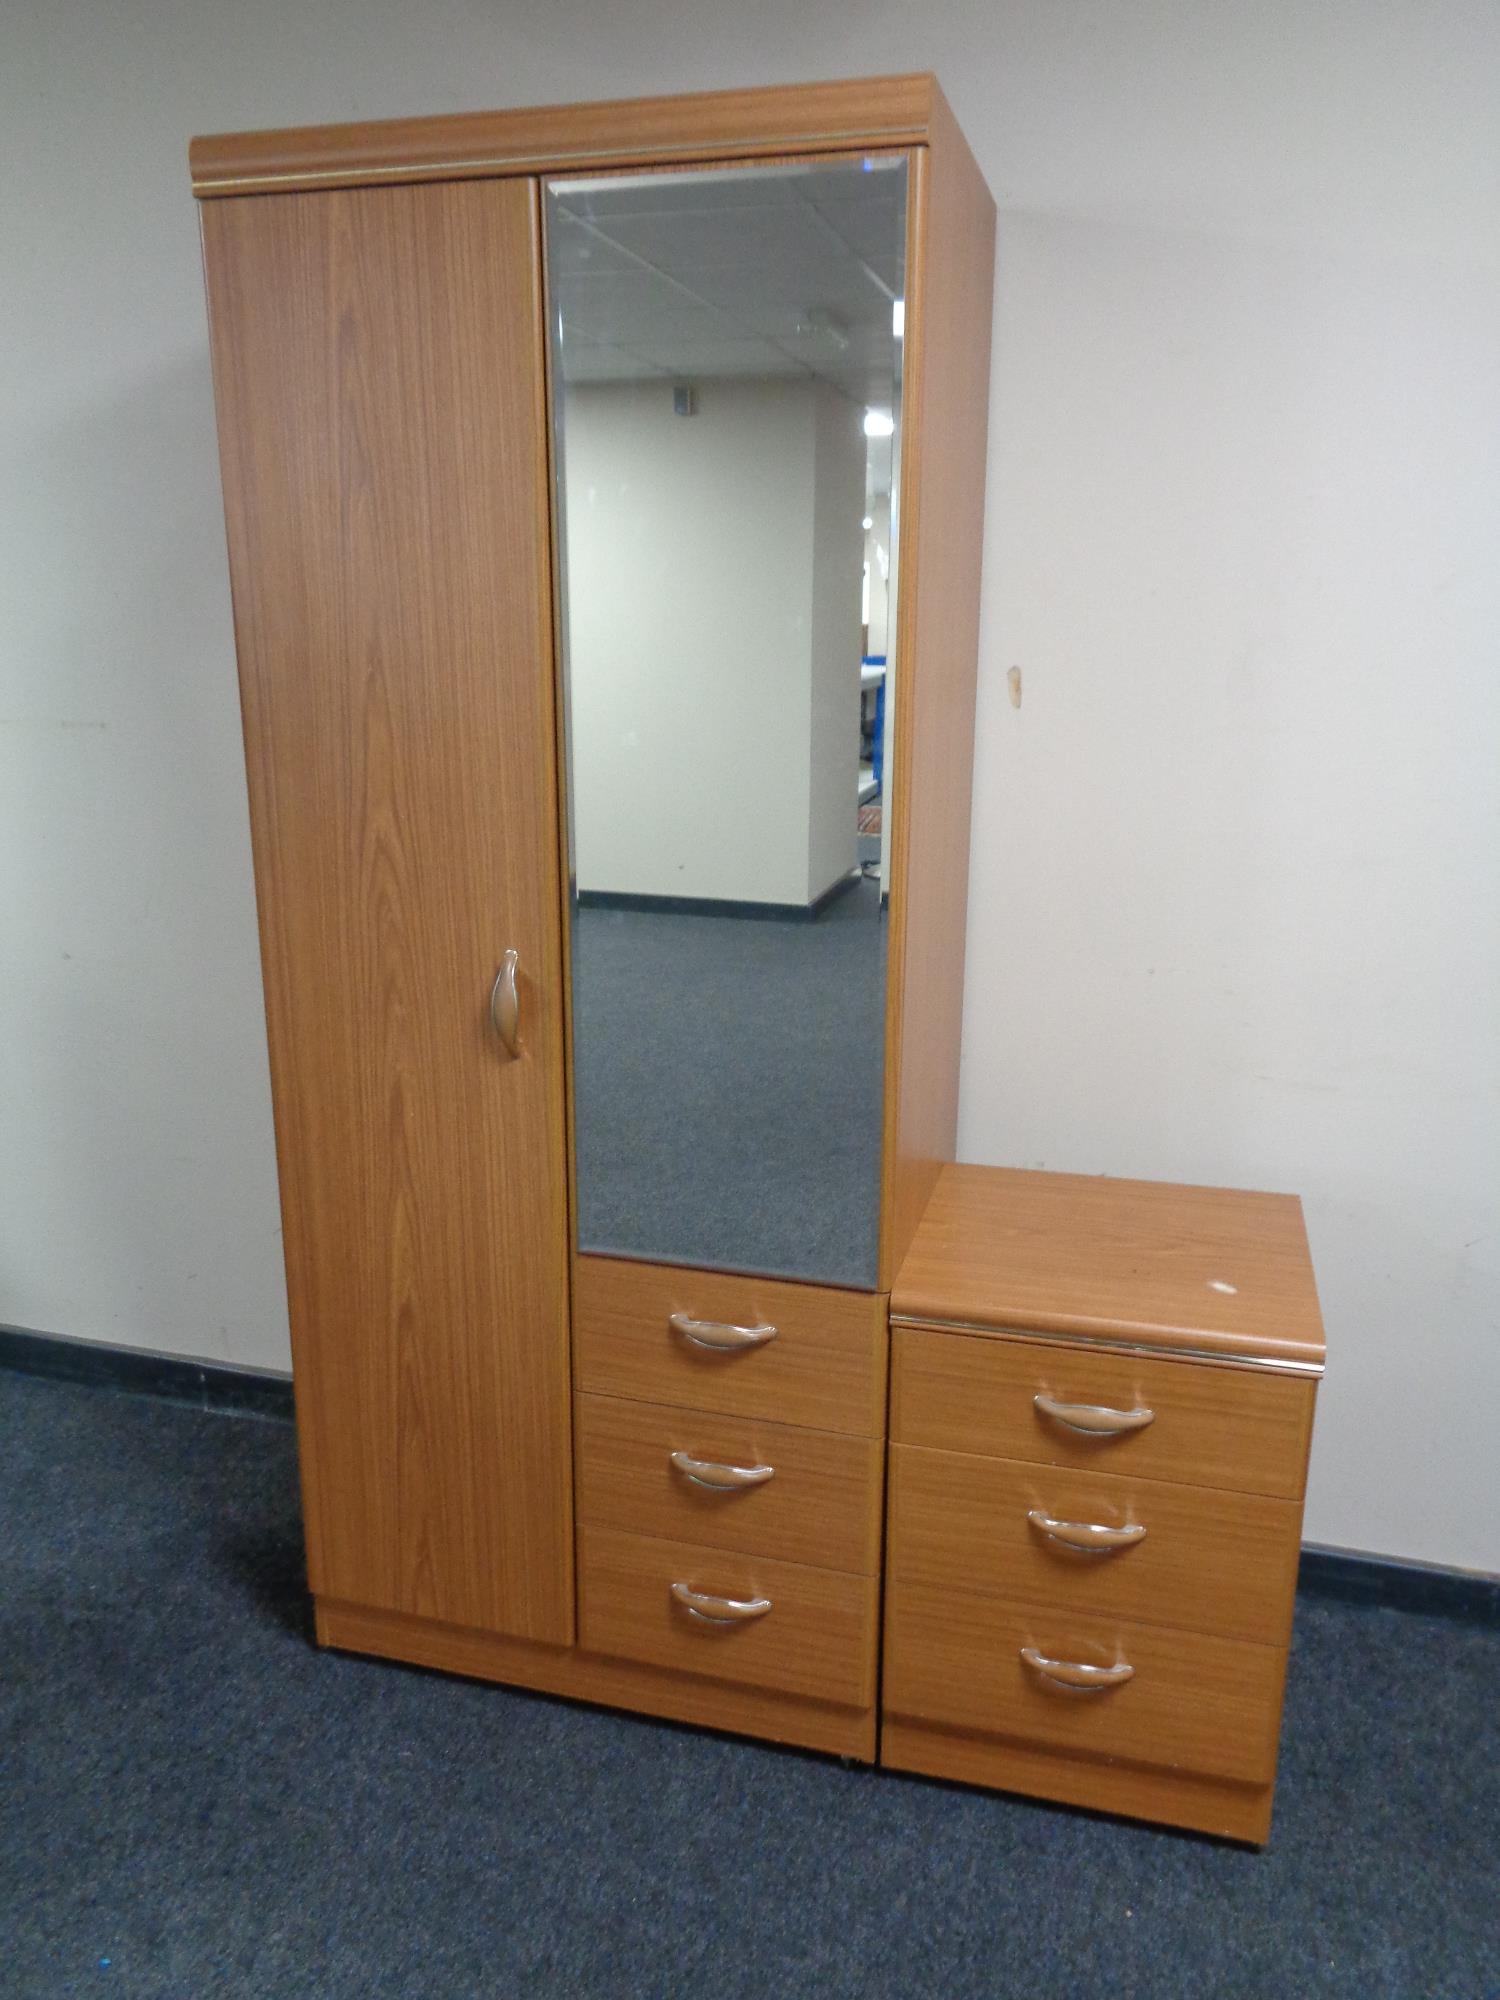 An Allston furniture combination wardrobe with matching three drawer bedside chest